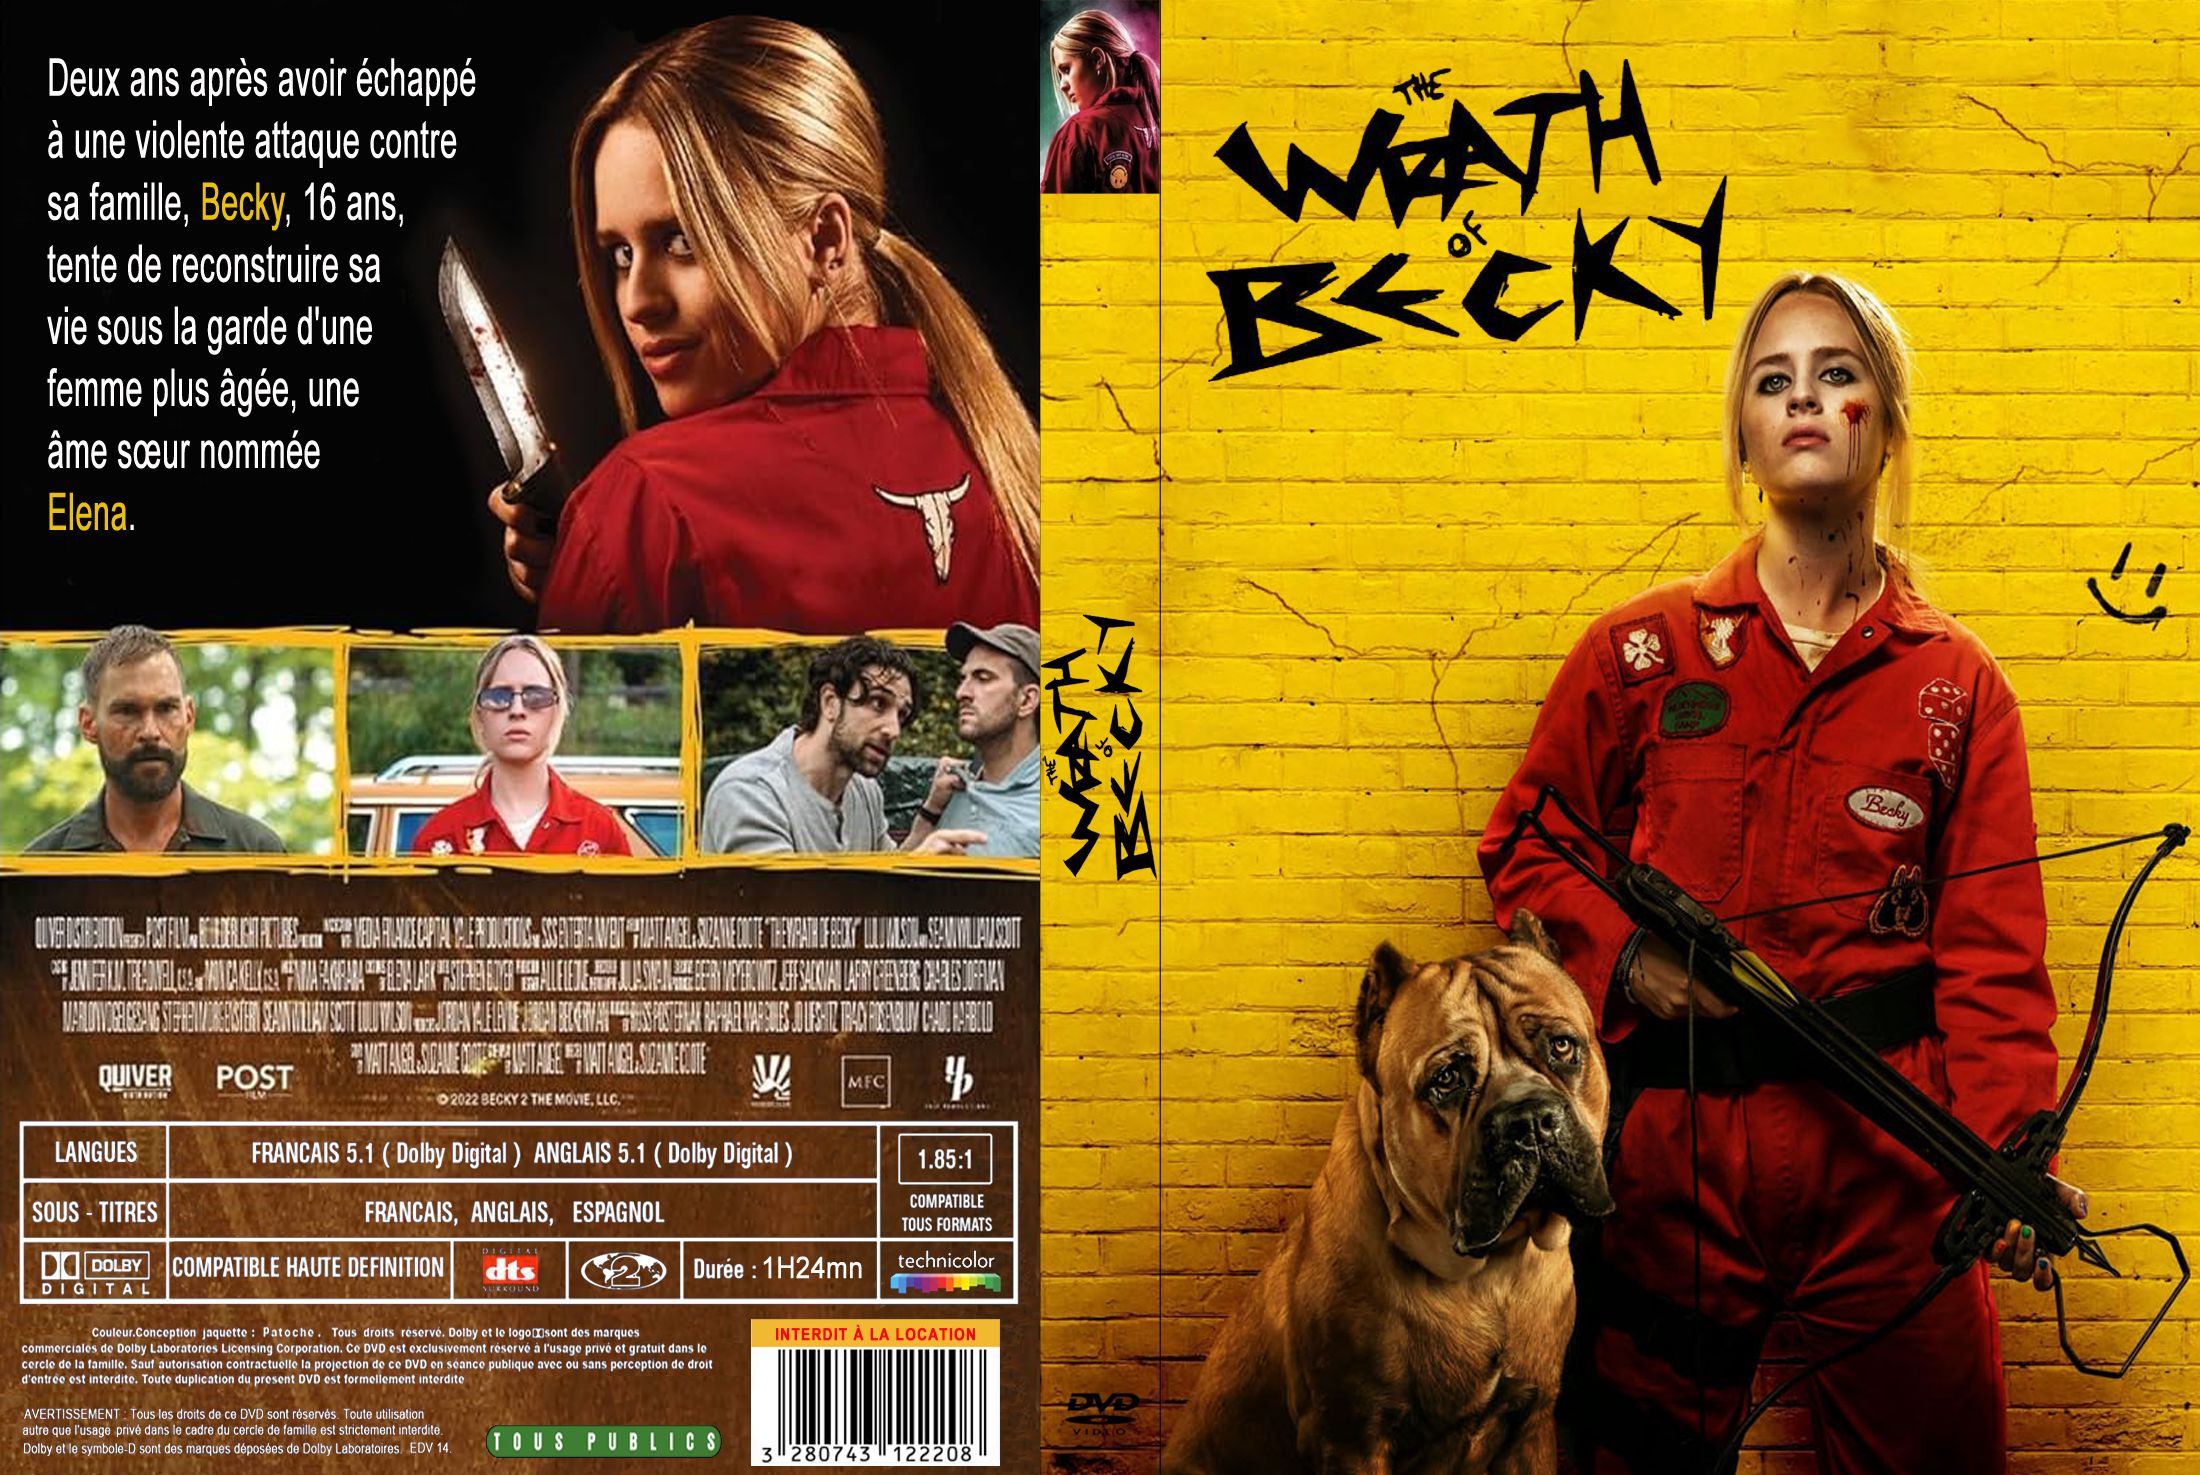 Jaquette DVD The wrath of Becky custom